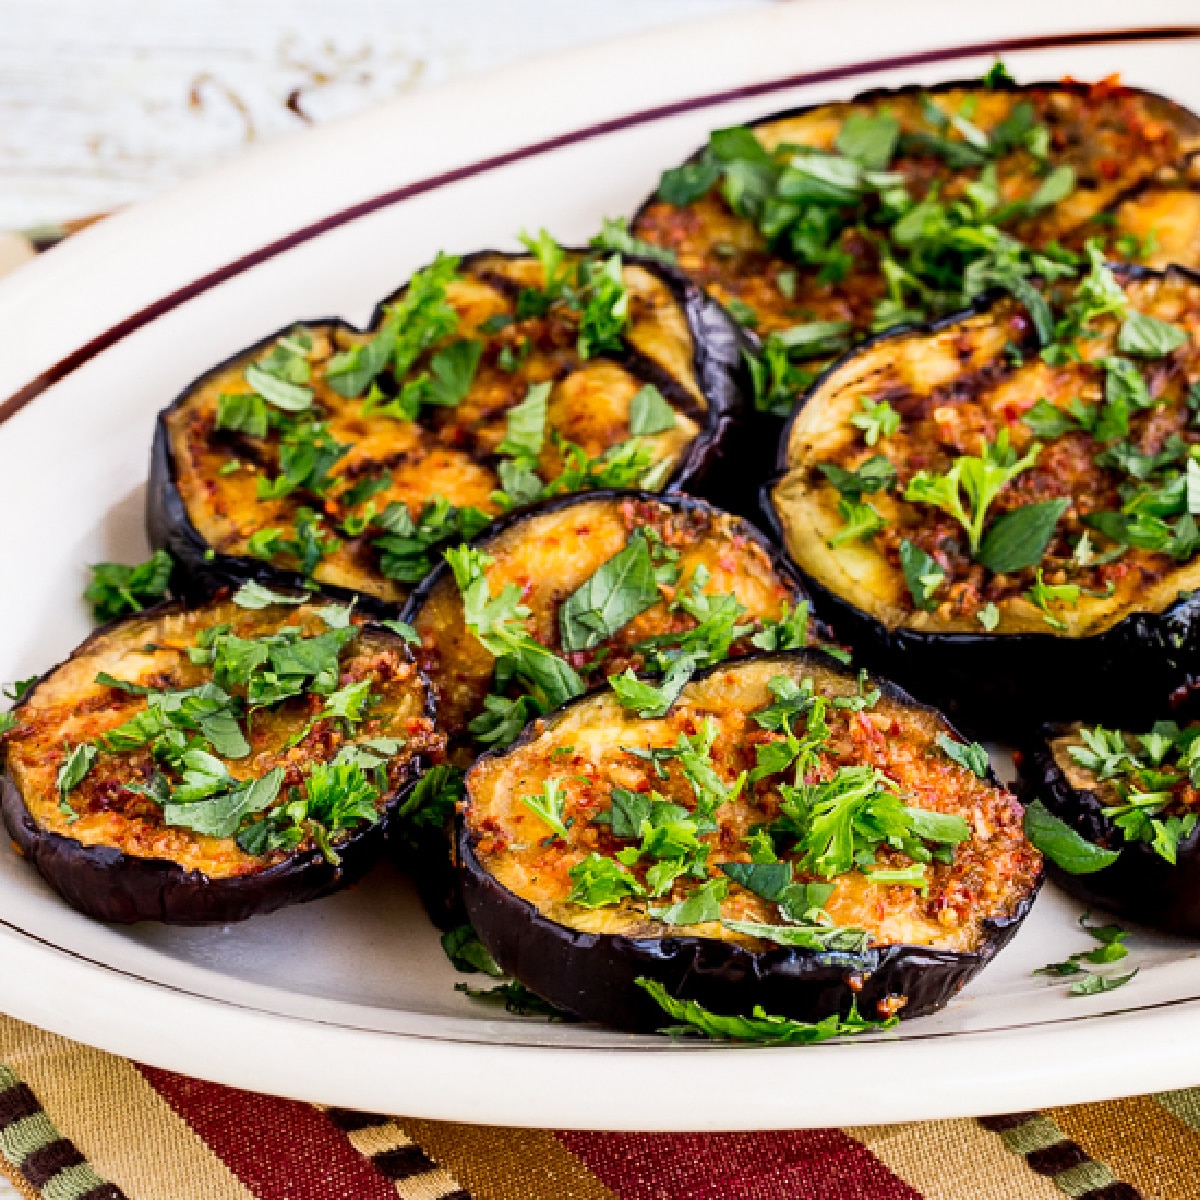 square image of Spicy Grilled Eggplant shown on serving plate with fresh herbs sprinkled over